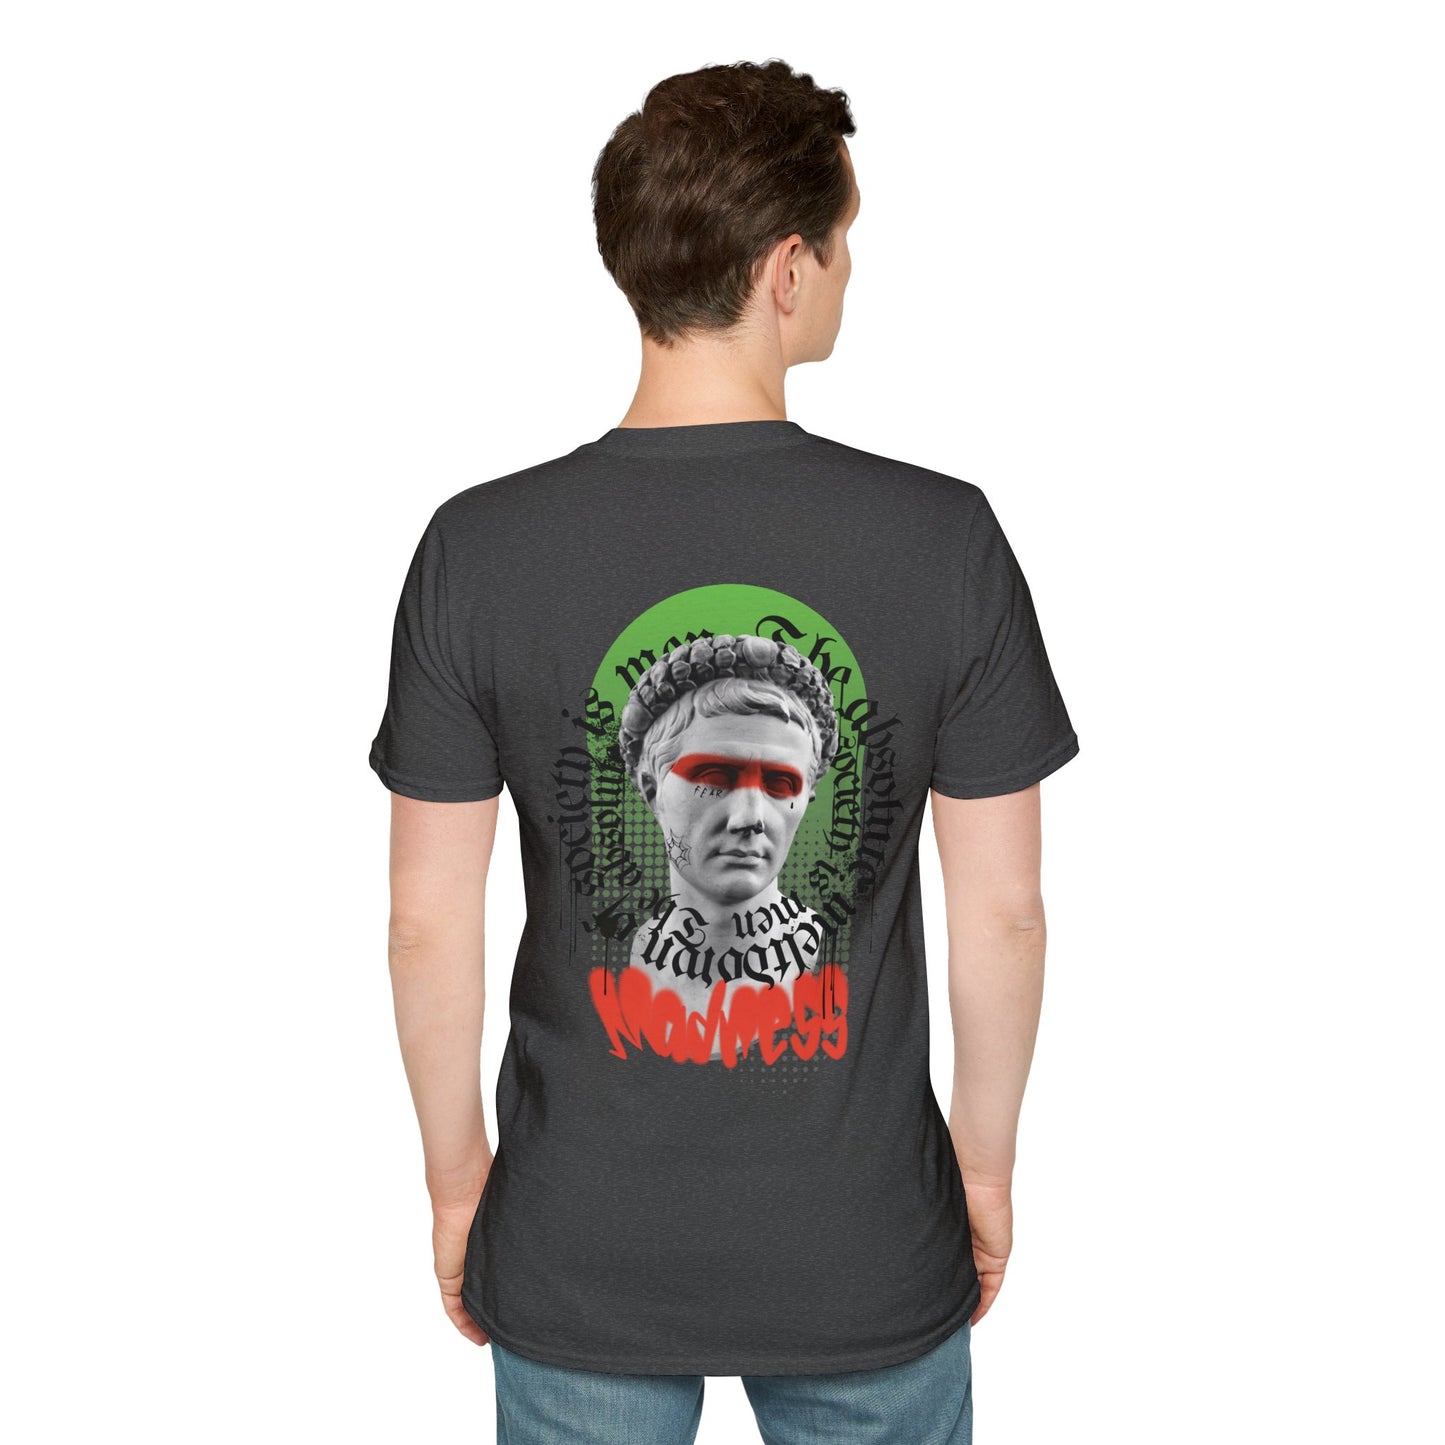 Dark GreyT-shirt with a Greek statue face and the word ‘Madness’ in bold red lettering